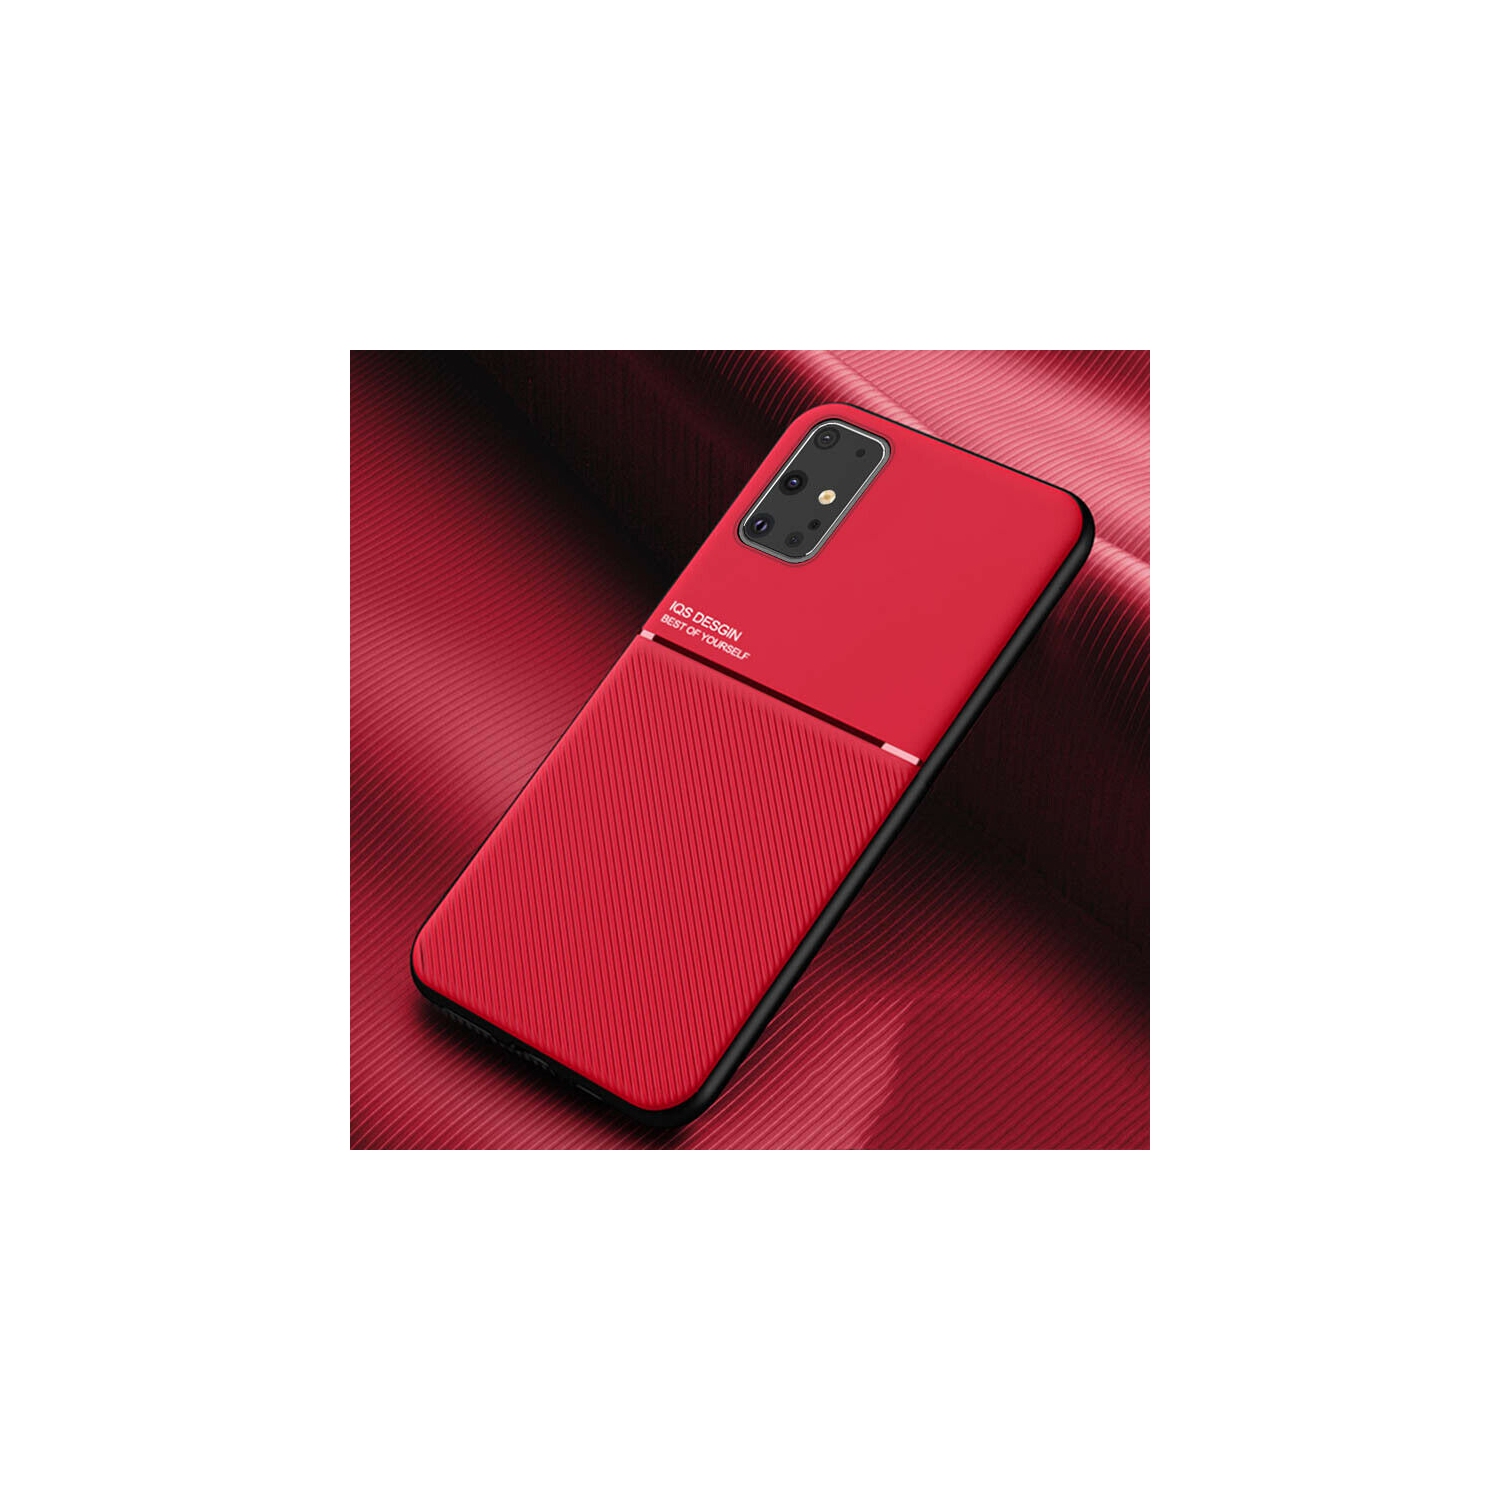 Kelvin Leather Magnetic Texture Slim Matte Back Phone Cove Anti Fall Frosted Stripe Cases For Samsunf Galaxy S20 FE -Red (FREE SHIPPING)